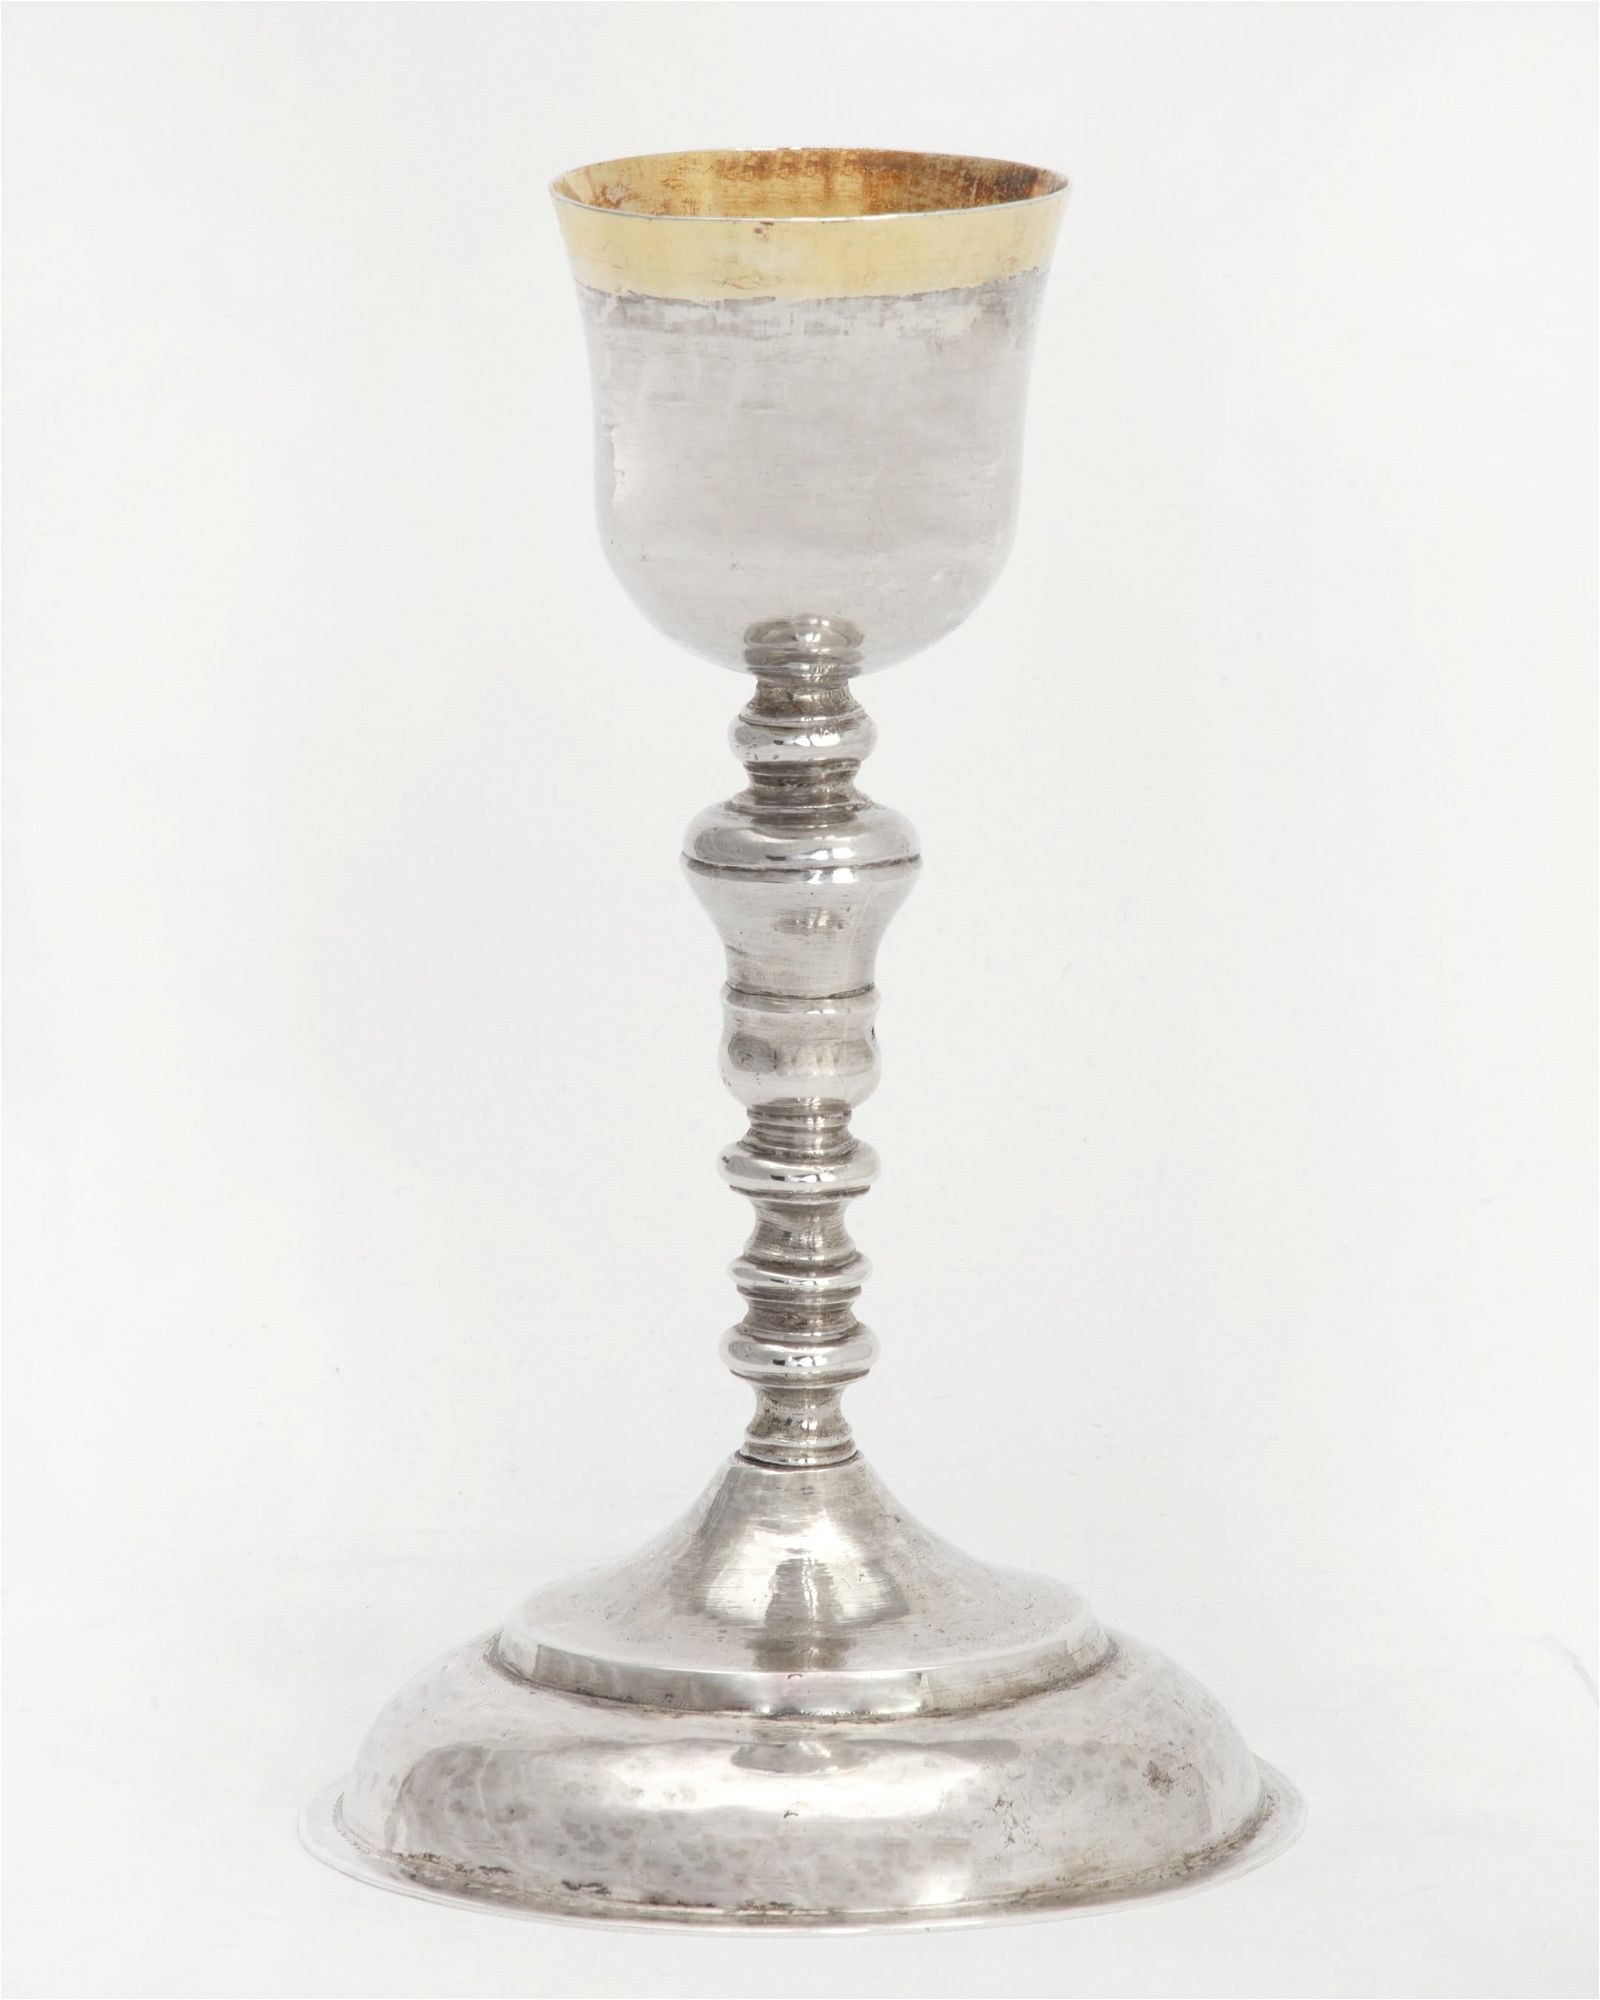 A SILVER CHALICE, EUROPEAN OR SOUTH